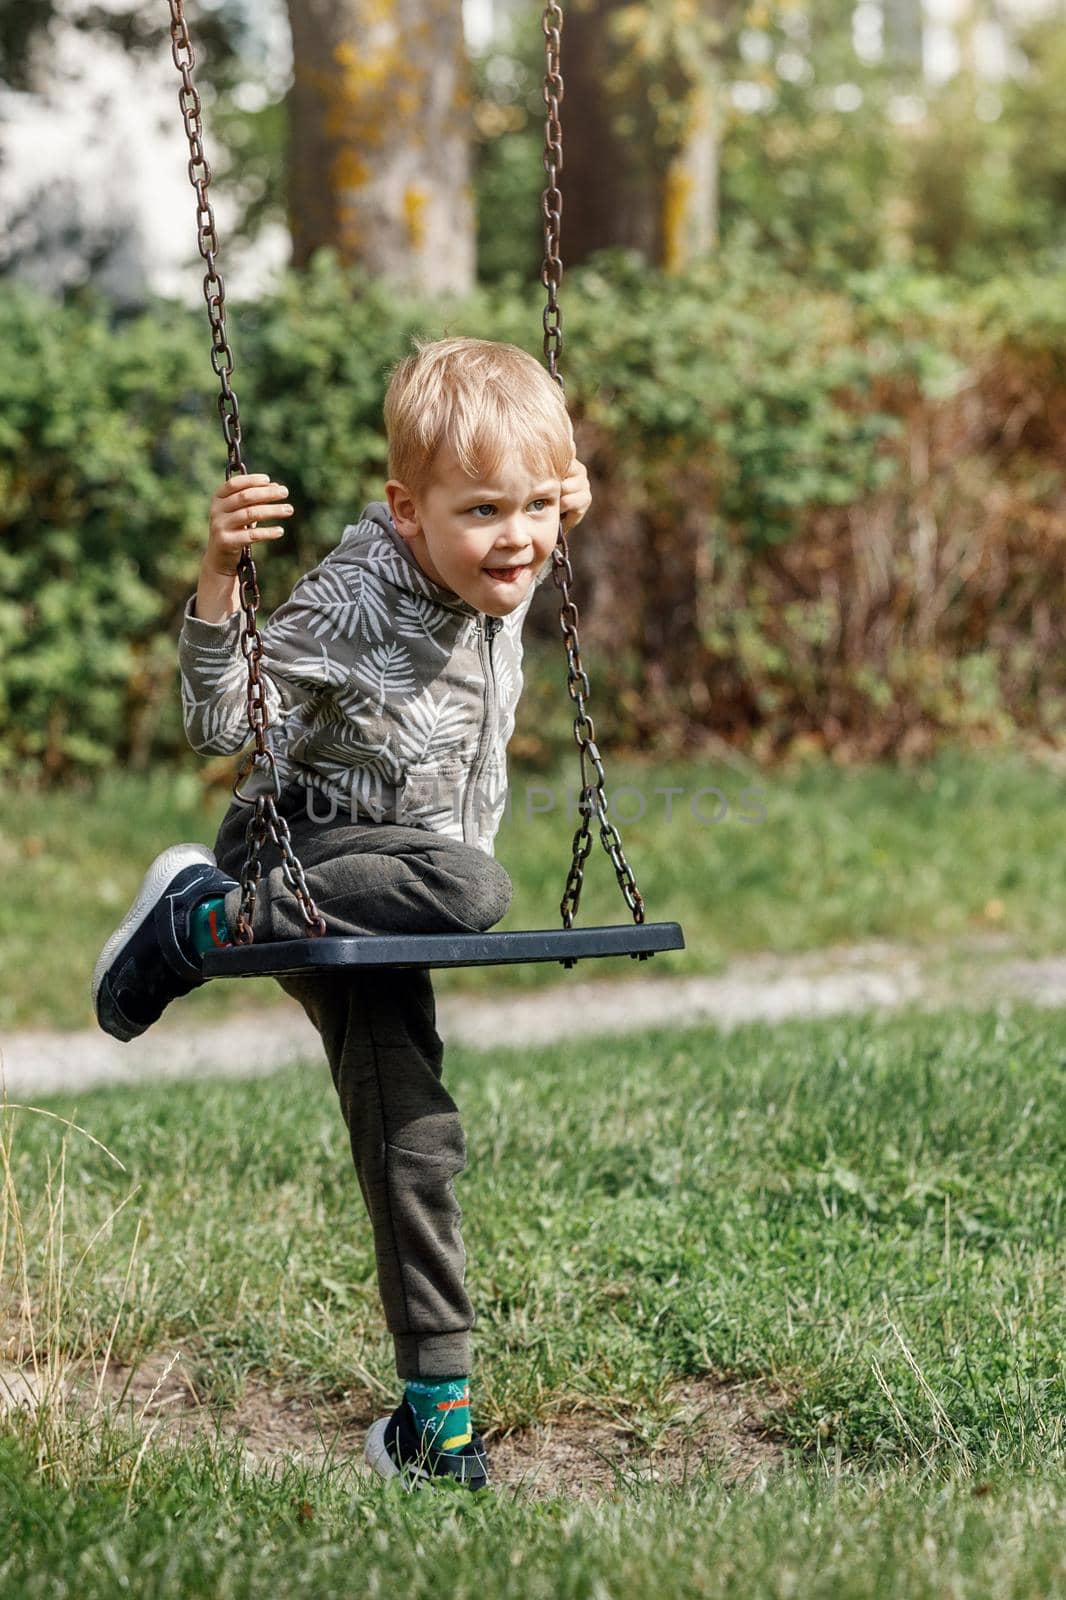 A little self-sufficient boy tries his best to climb a chain swing in a city park.